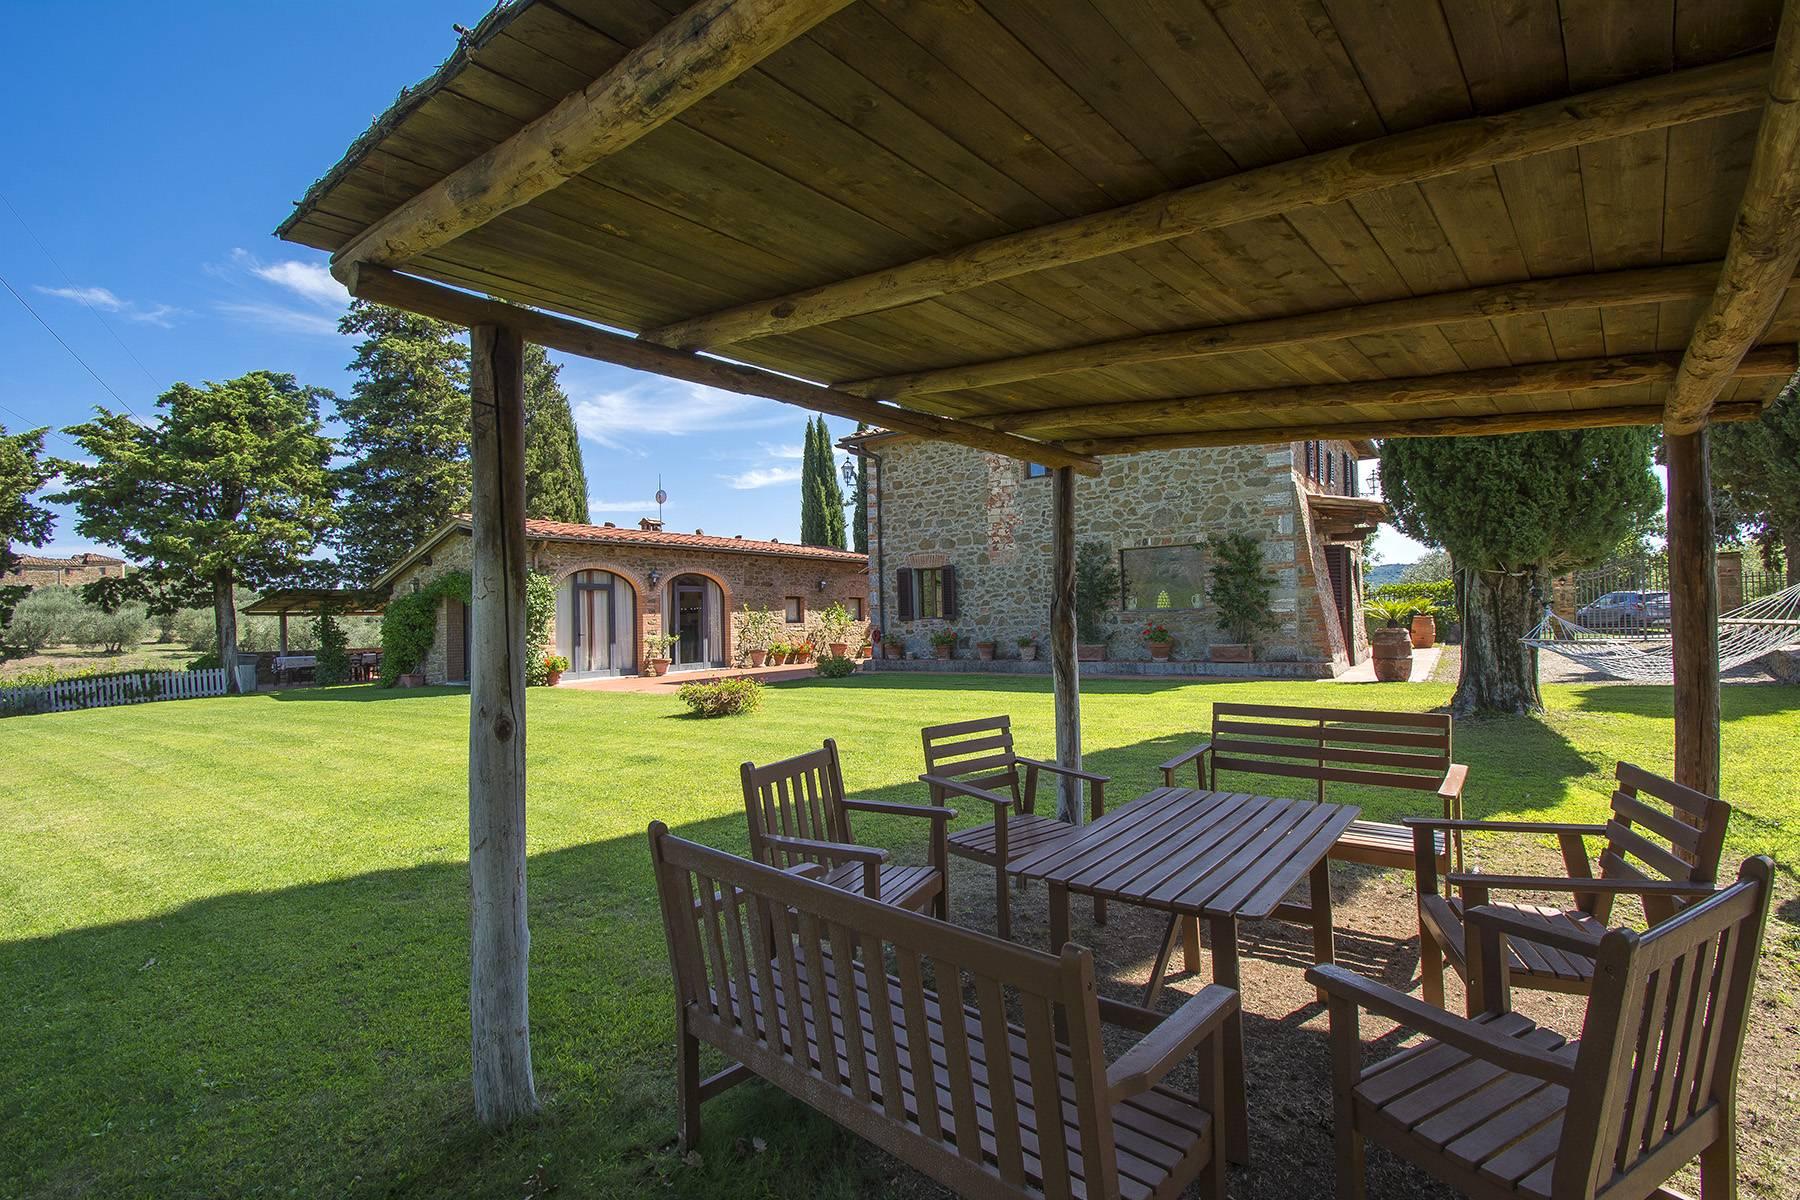 House in the Tuscan Hills for Sale - 4